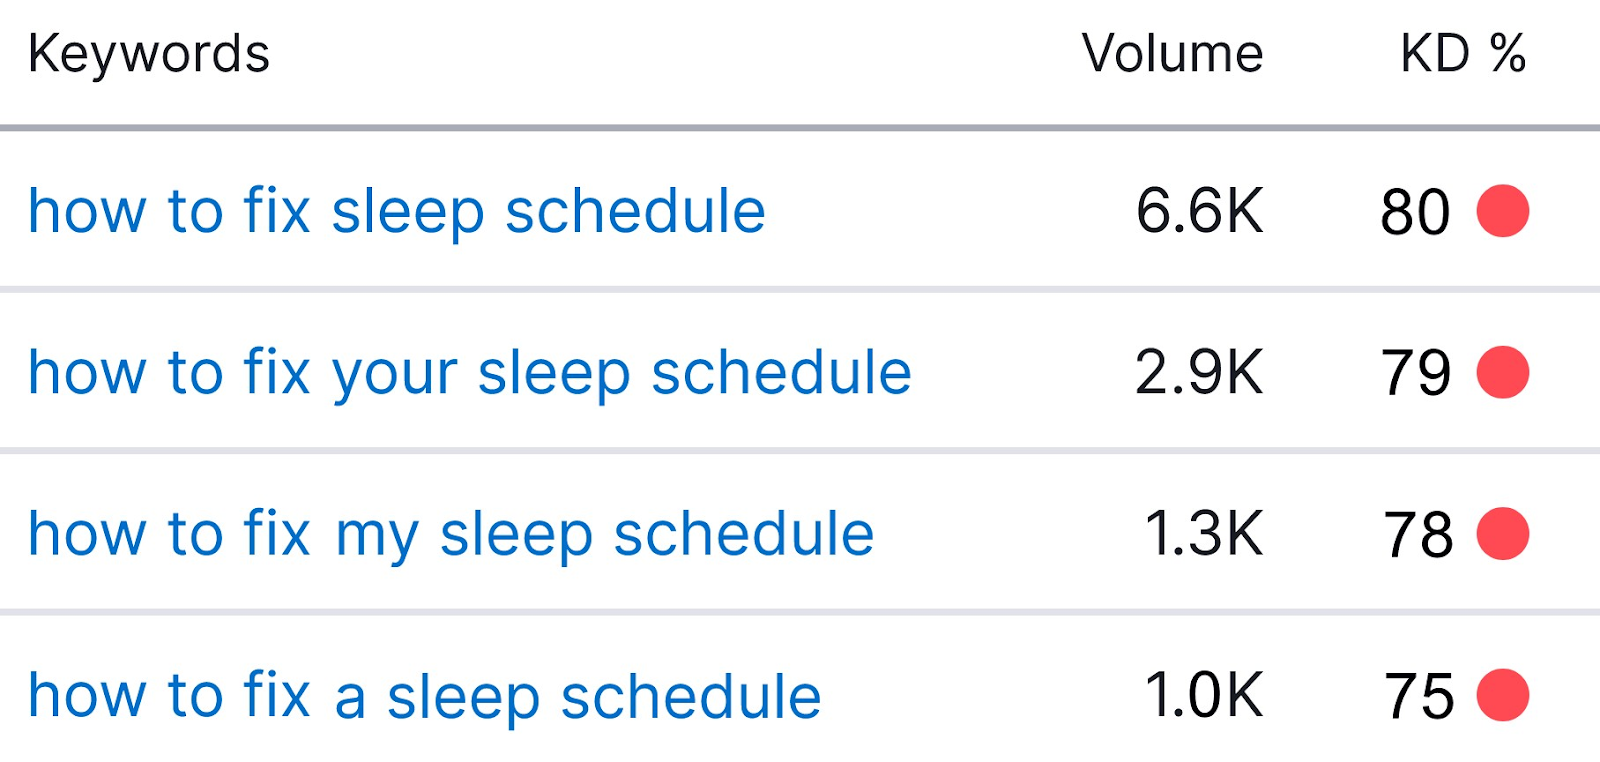 "،w to fix sleep schedule" keyword variations and their search volume